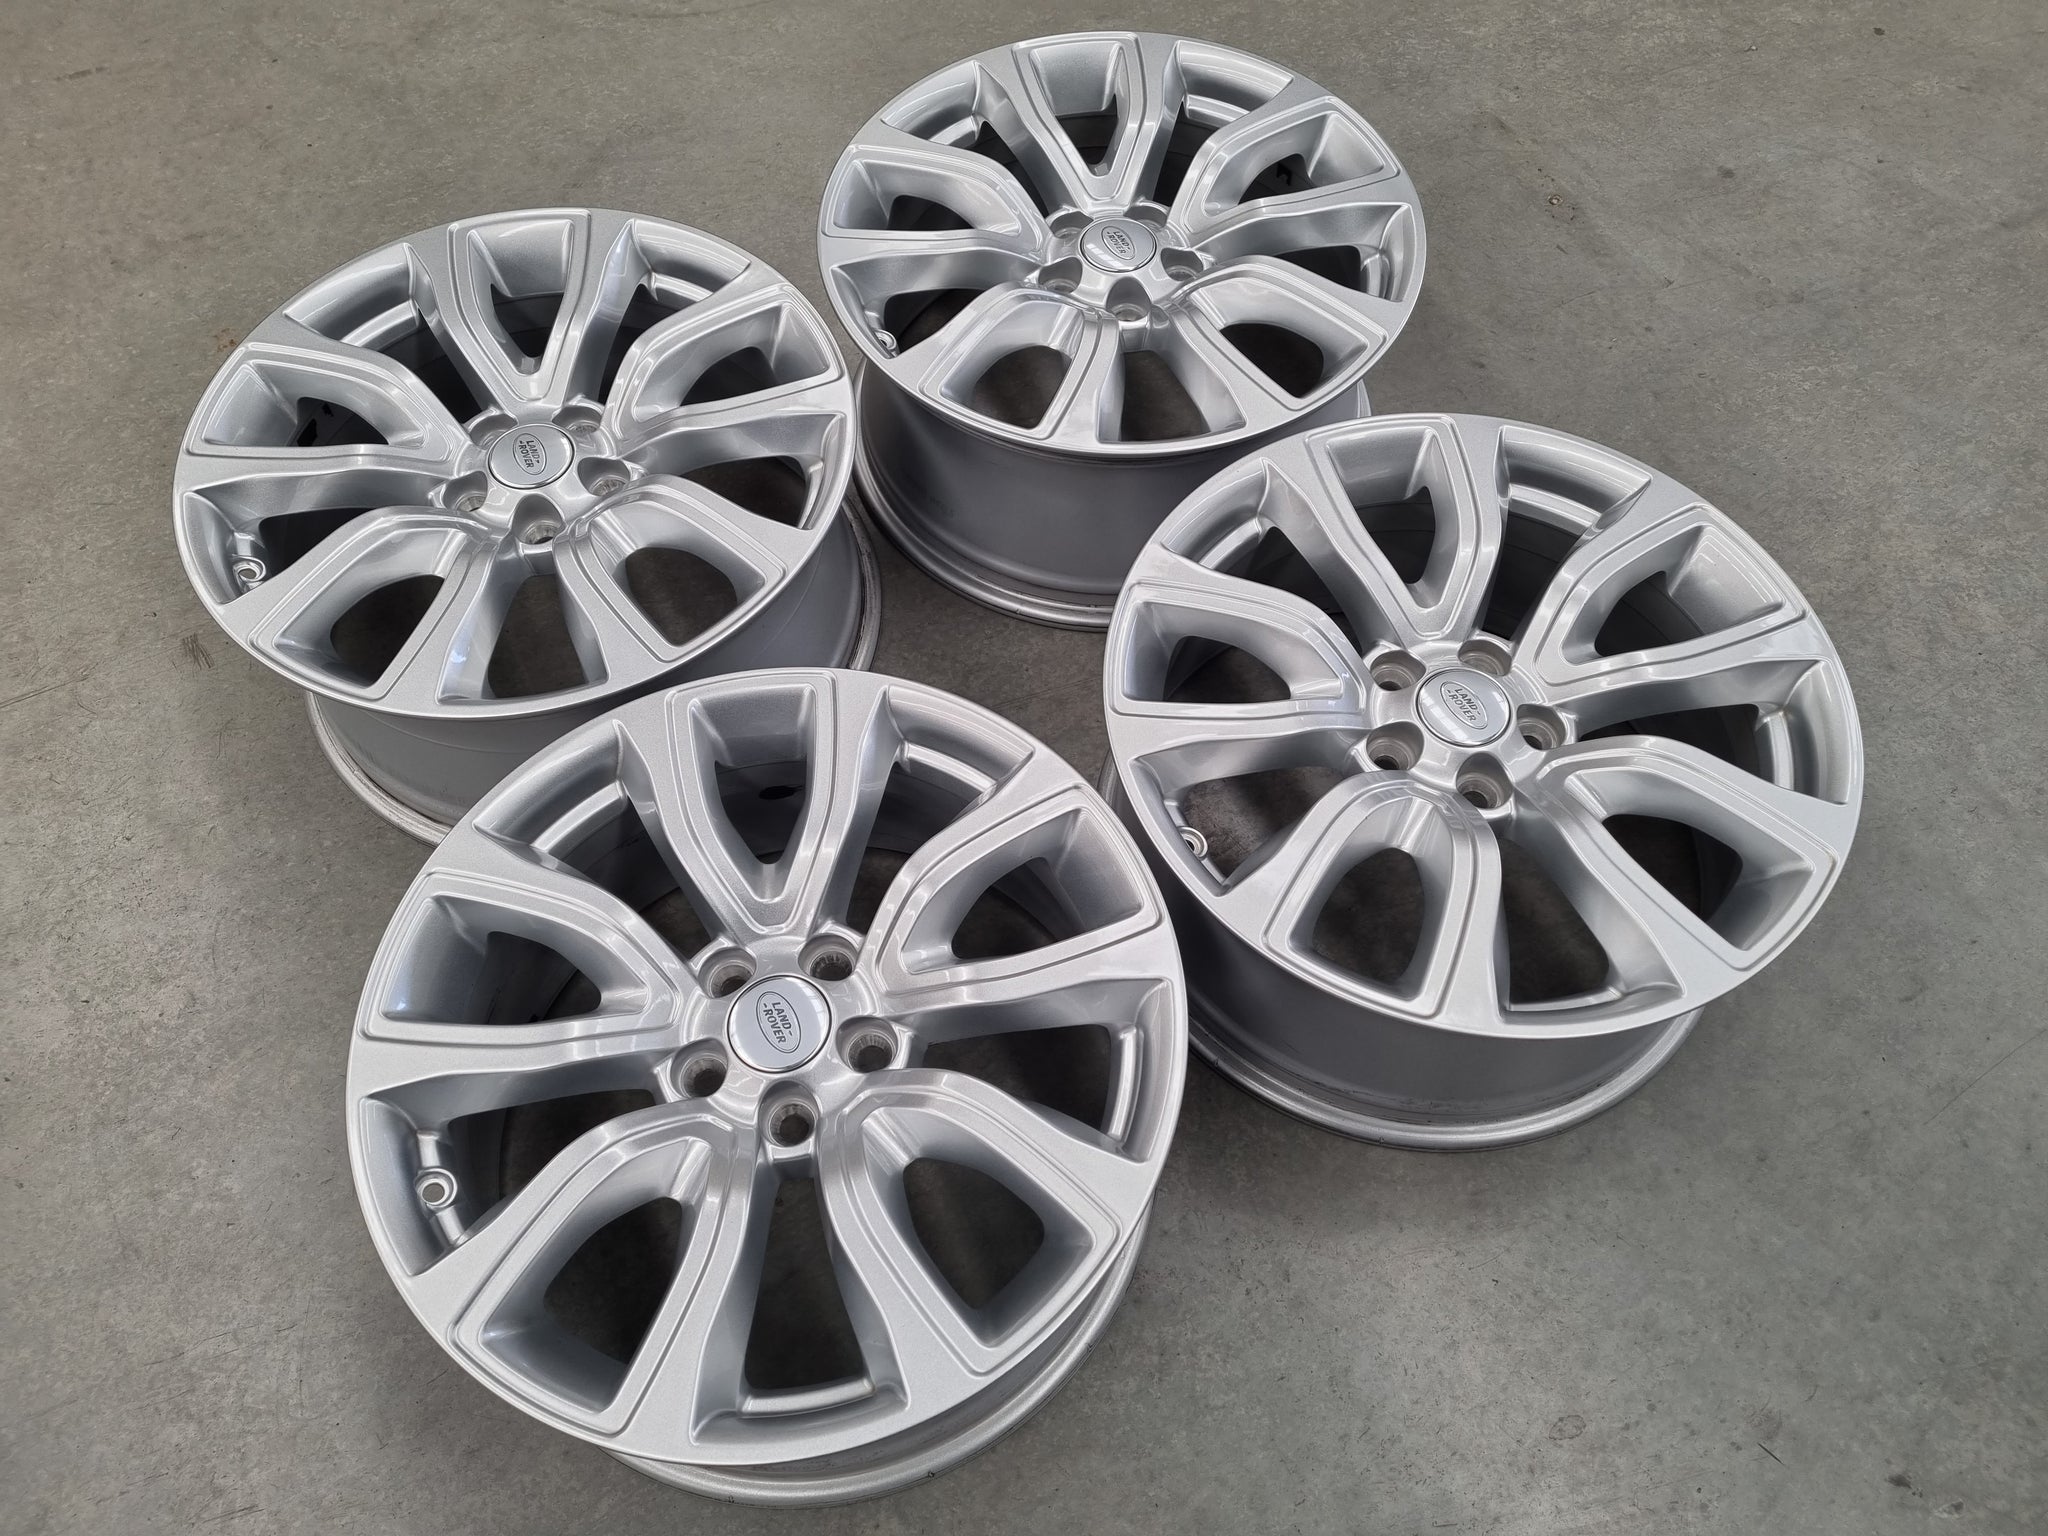 Load image into Gallery viewer, Genuine Range Rover Evoque EJ32 18 Inch Alloy Wheels Set of 4
